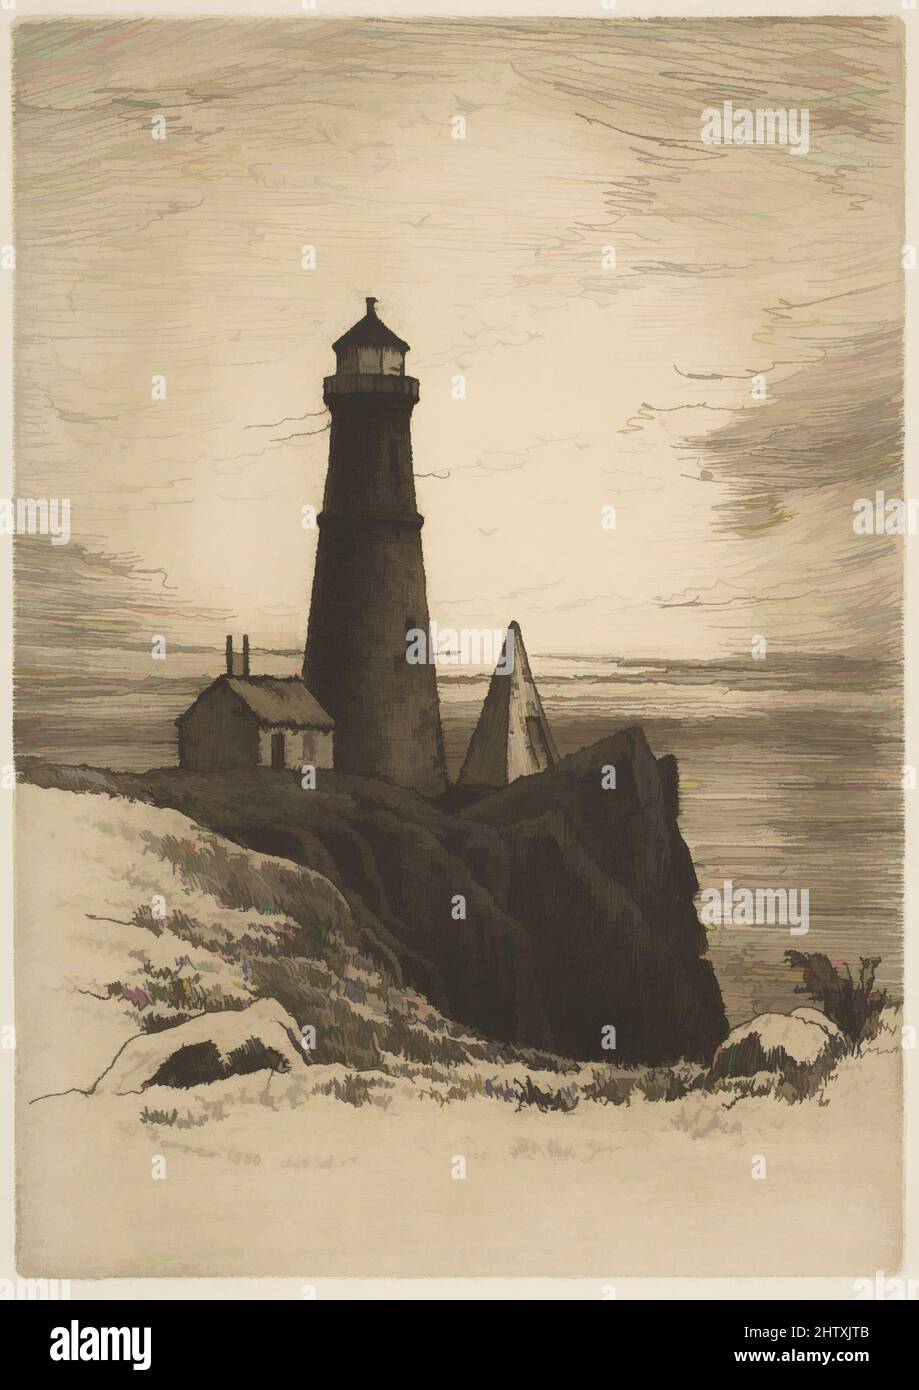 Art inspired by Lighthouse, 1880, Etching, sheet: 6 15/16 x 4 7/8 in. (17.6 x 12.4 cm), Prints, Henry Farrer (American, London 1844–1903 New York, Classic works modernized by Artotop with a splash of modernity. Shapes, color and value, eye-catching visual impact on art. Emotions through freedom of artworks in a contemporary way. A timeless message pursuing a wildly creative new direction. Artists turning to the digital medium and creating the Artotop NFT Stock Photo